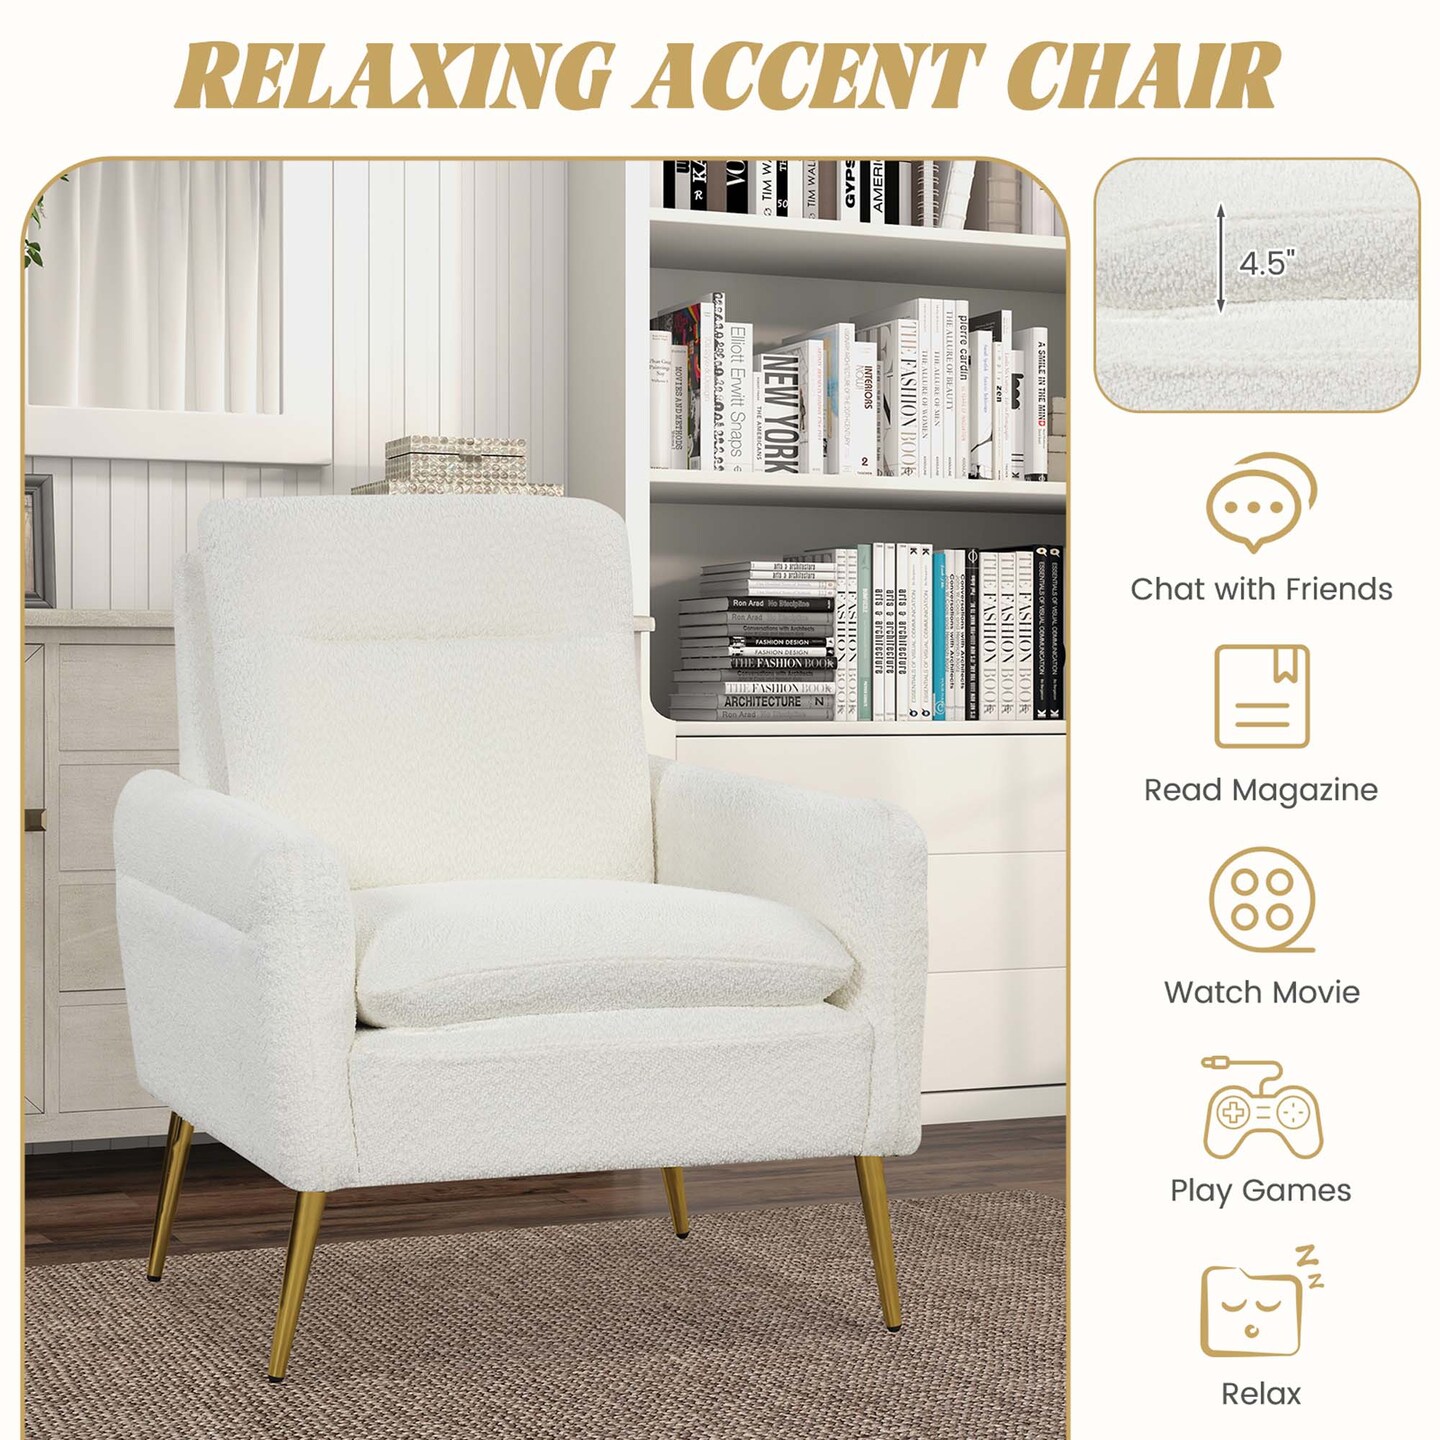 Costway Modern Accent Chair Upholstered  Armchair w/ Tapered Metal Legs White